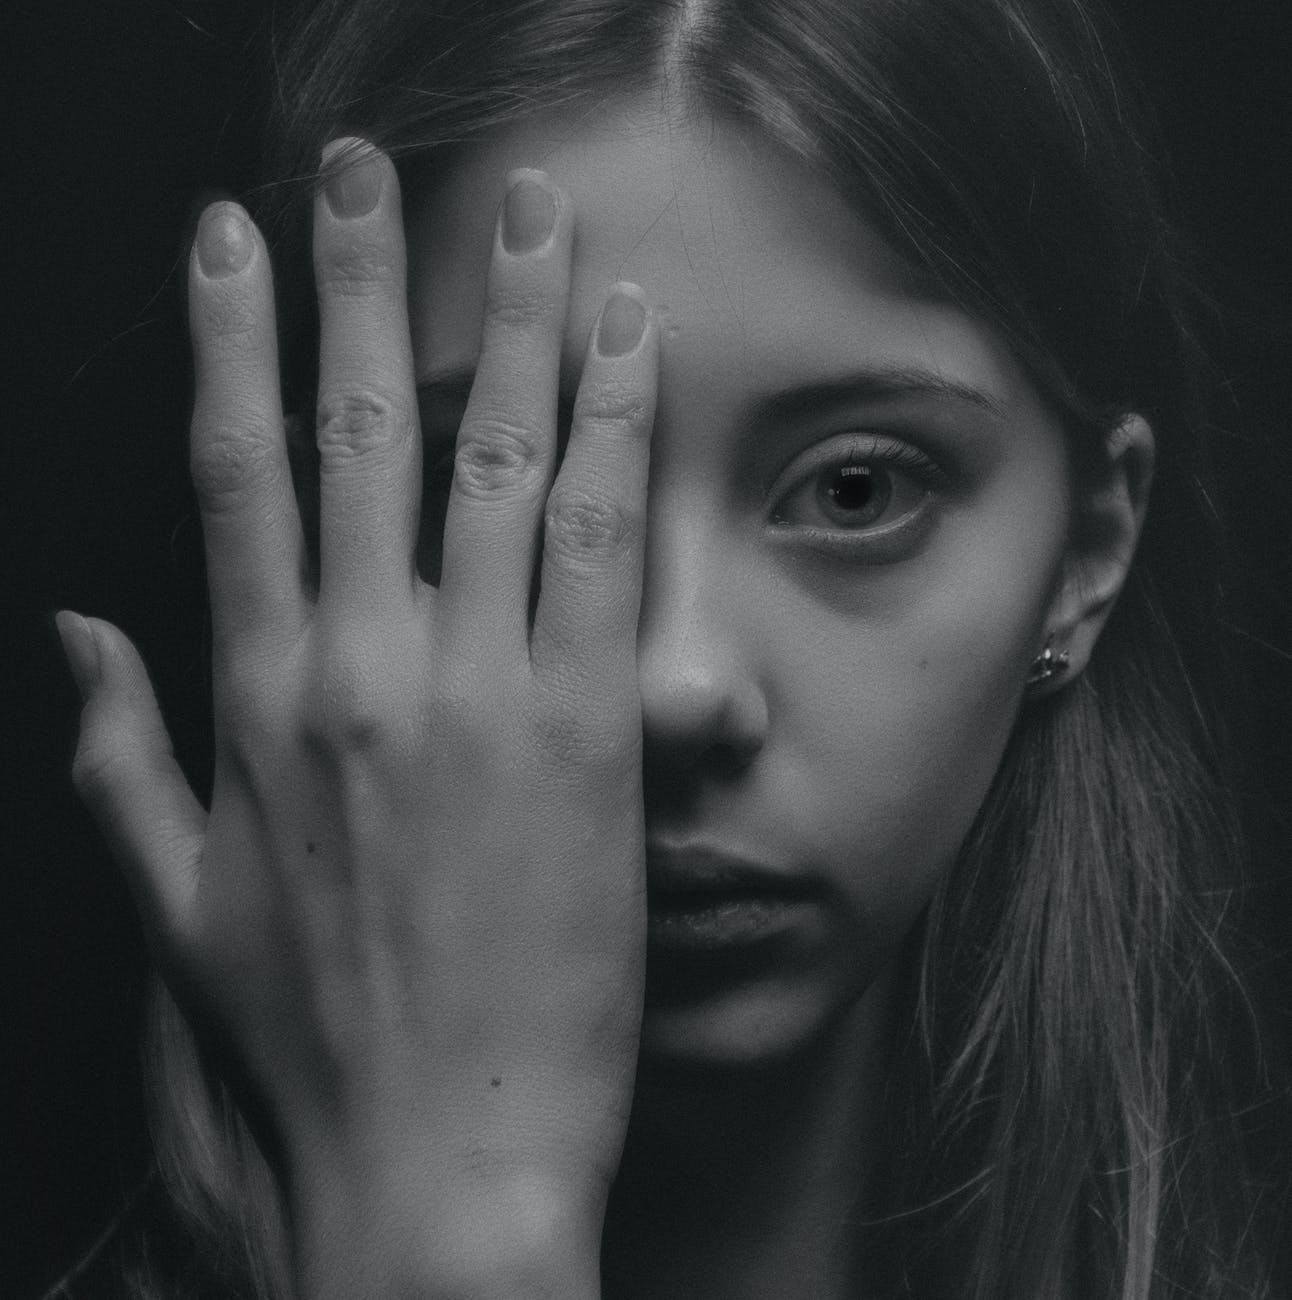 grayscale photo of woman covering her face by her hand